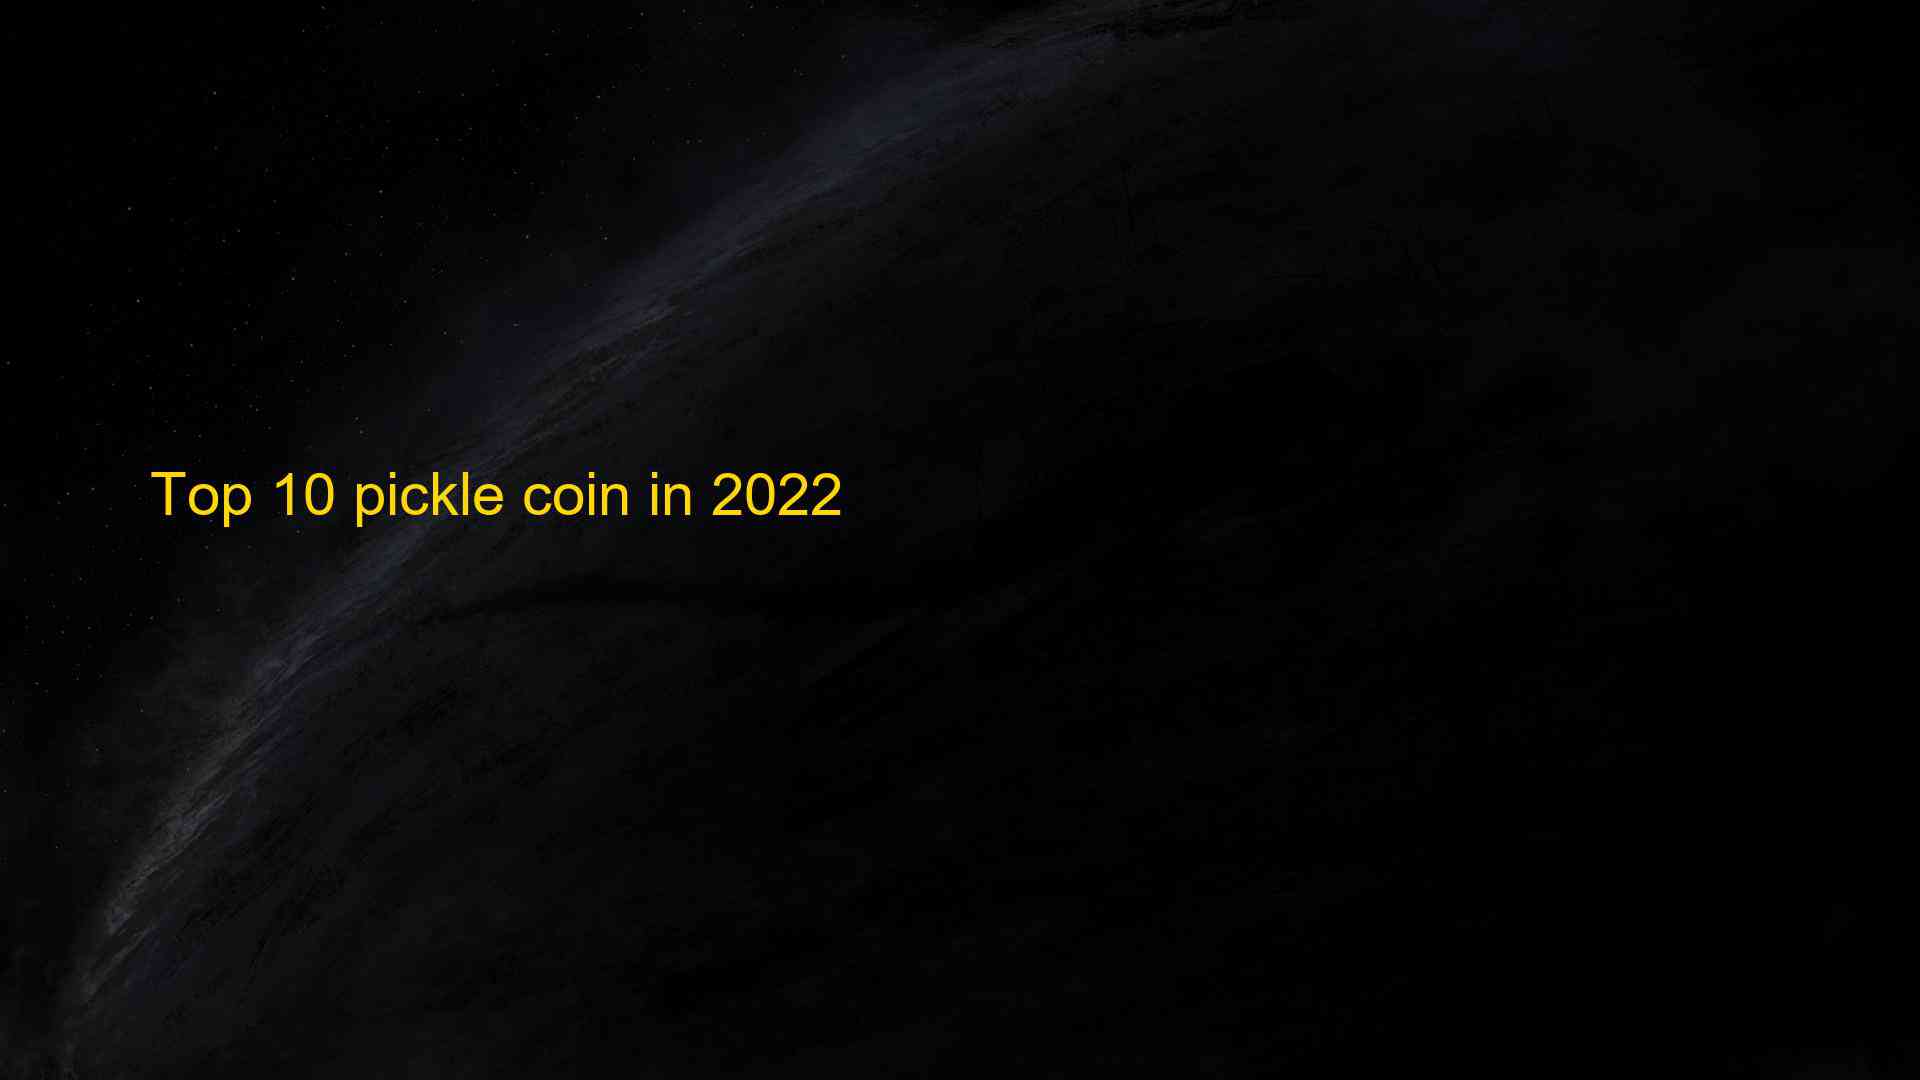 Top 10 pickle coin in 2022 1659941664